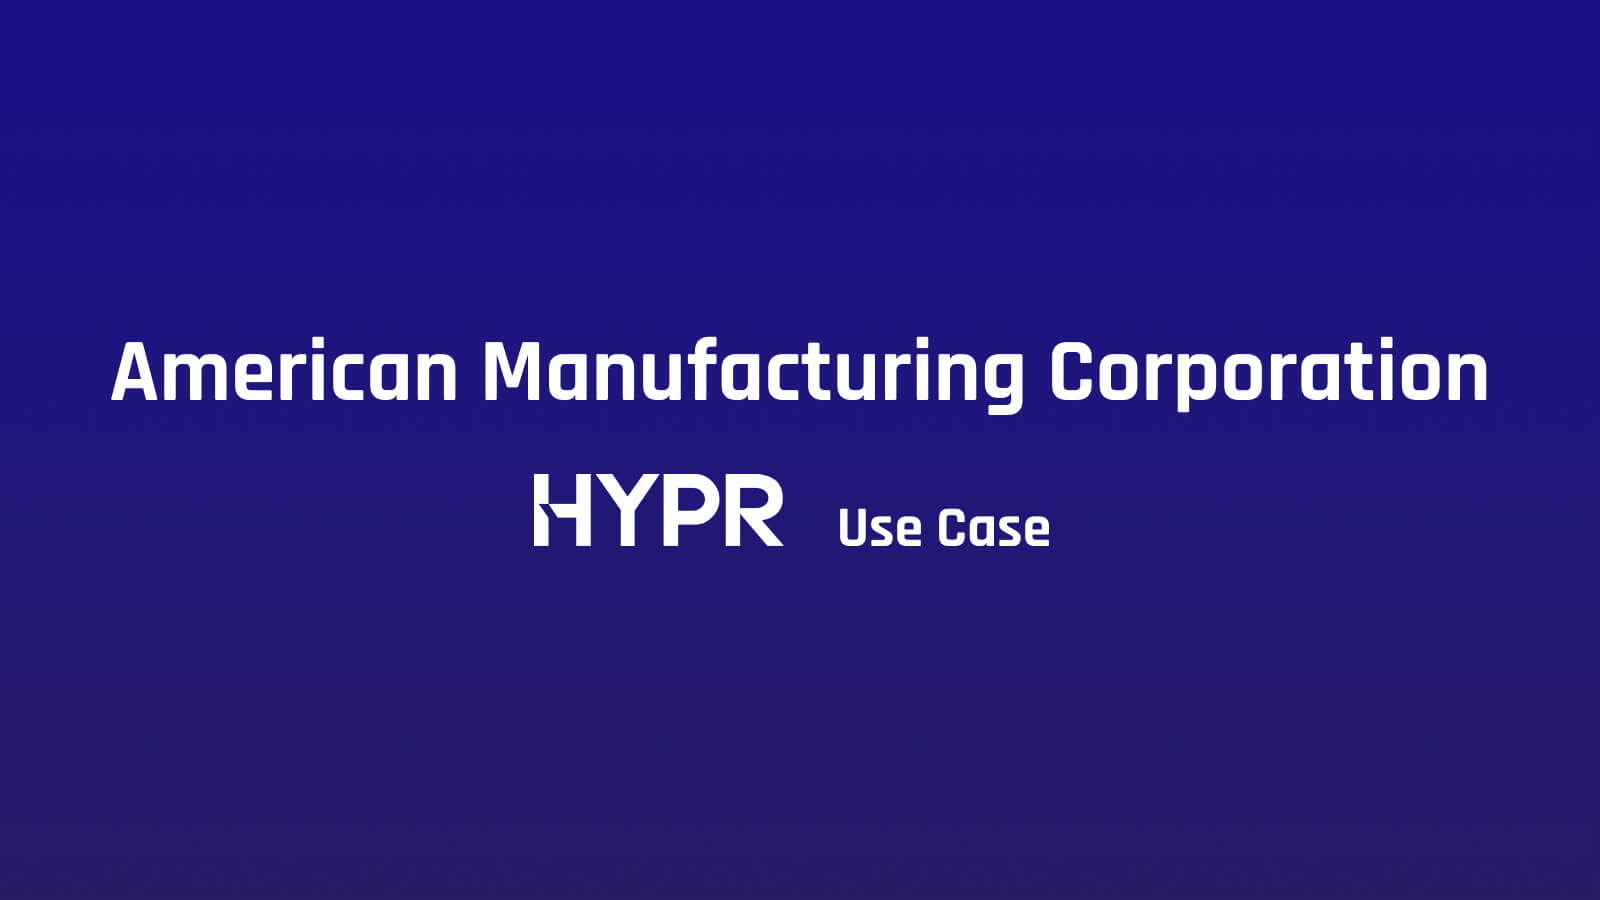 American Manufacturing Corporation